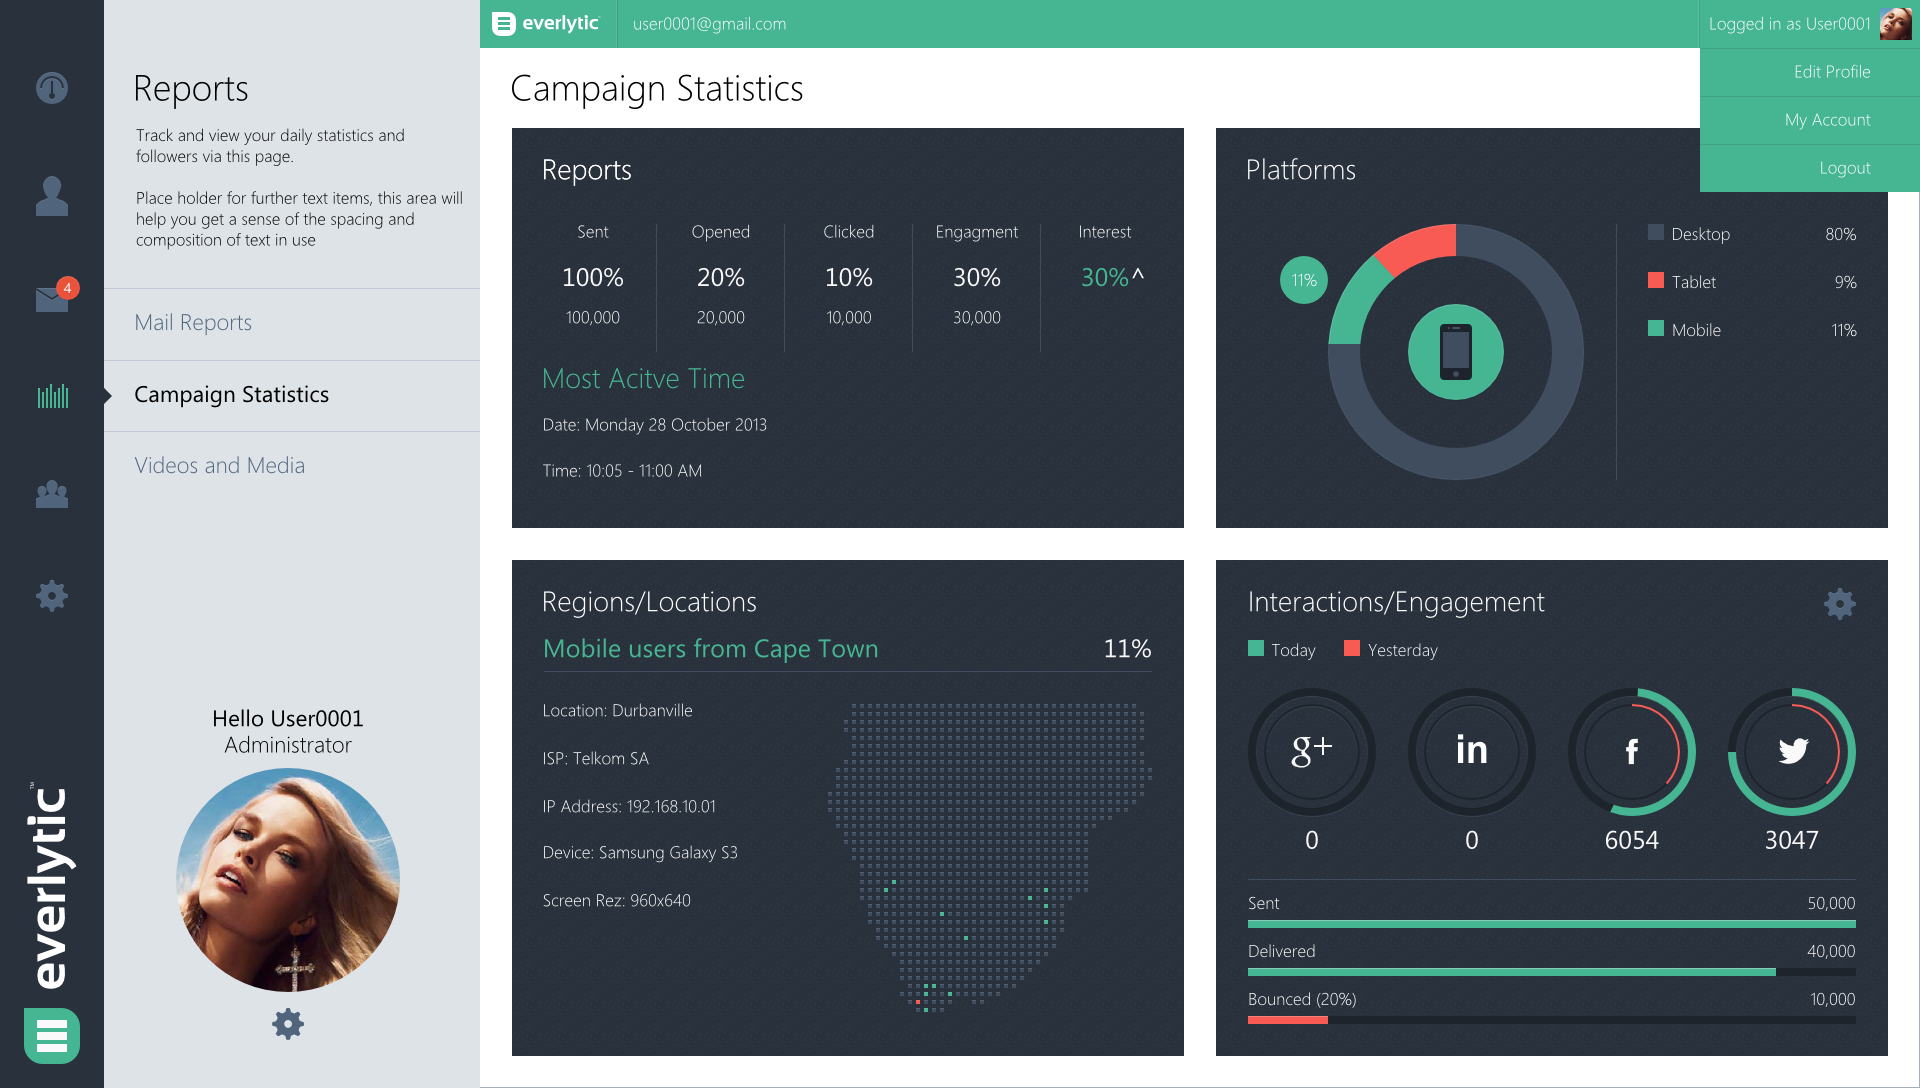 everlytic-cms-dashboard-2-by-zoe-love6.png